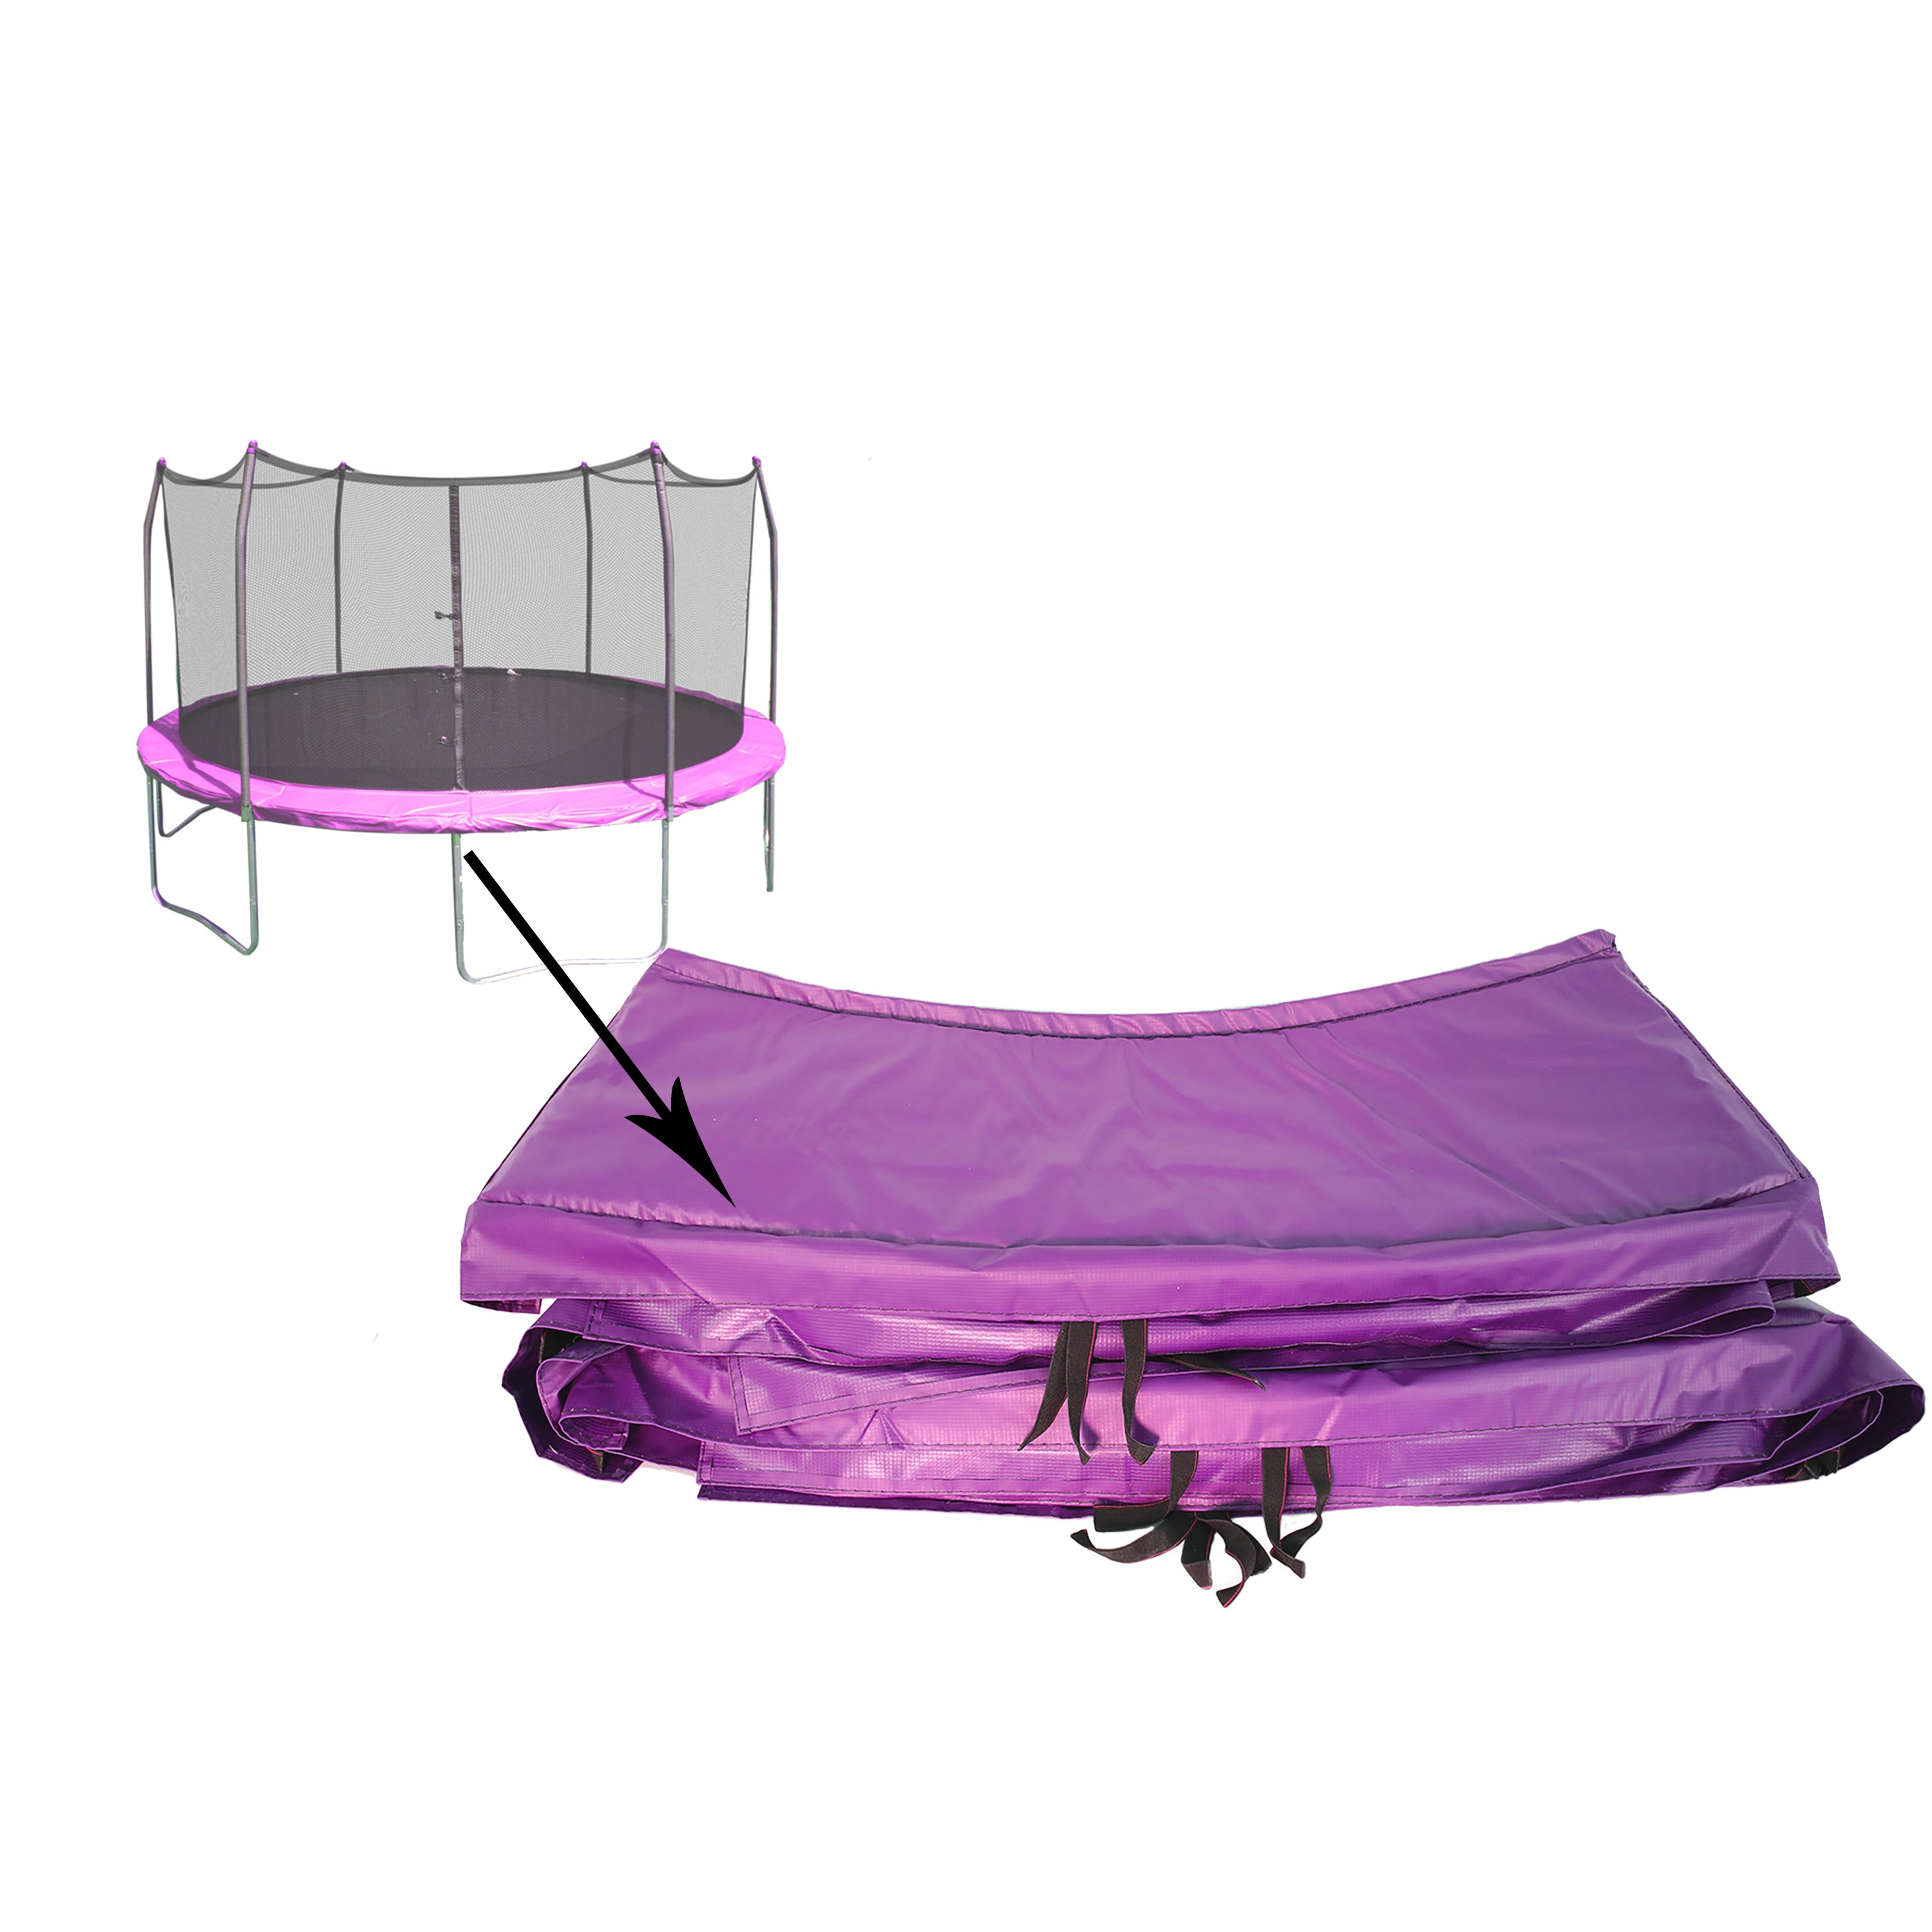 The purple spring pad is designed for 15-foot round trampolines. 